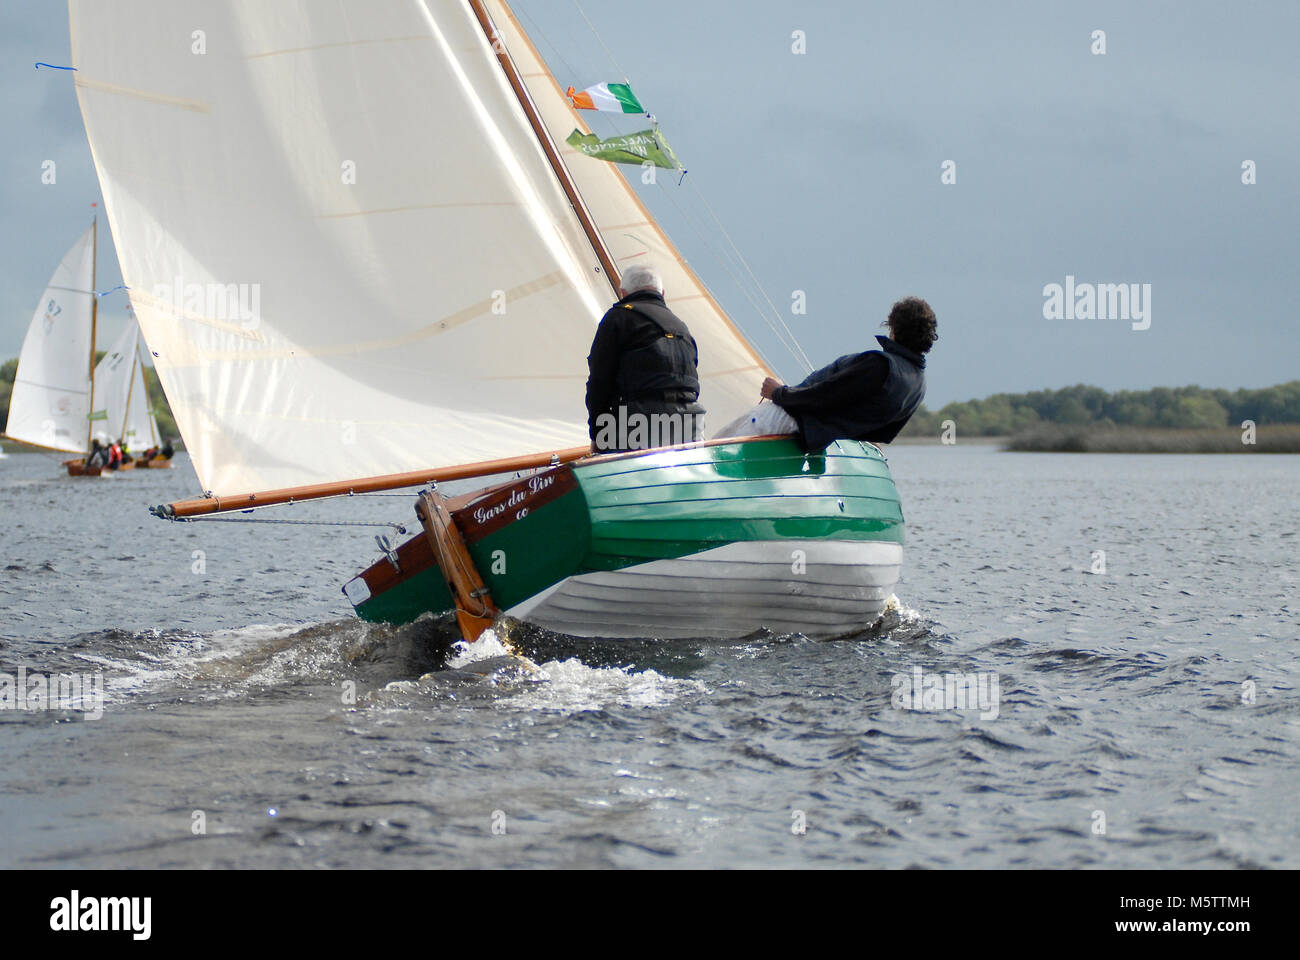 Sailing boat racing towards Tarmonbarry during a sailing raid on the River Shannon in Ireland. French sailor Patrick Morvan is at the helm. Stock Photo